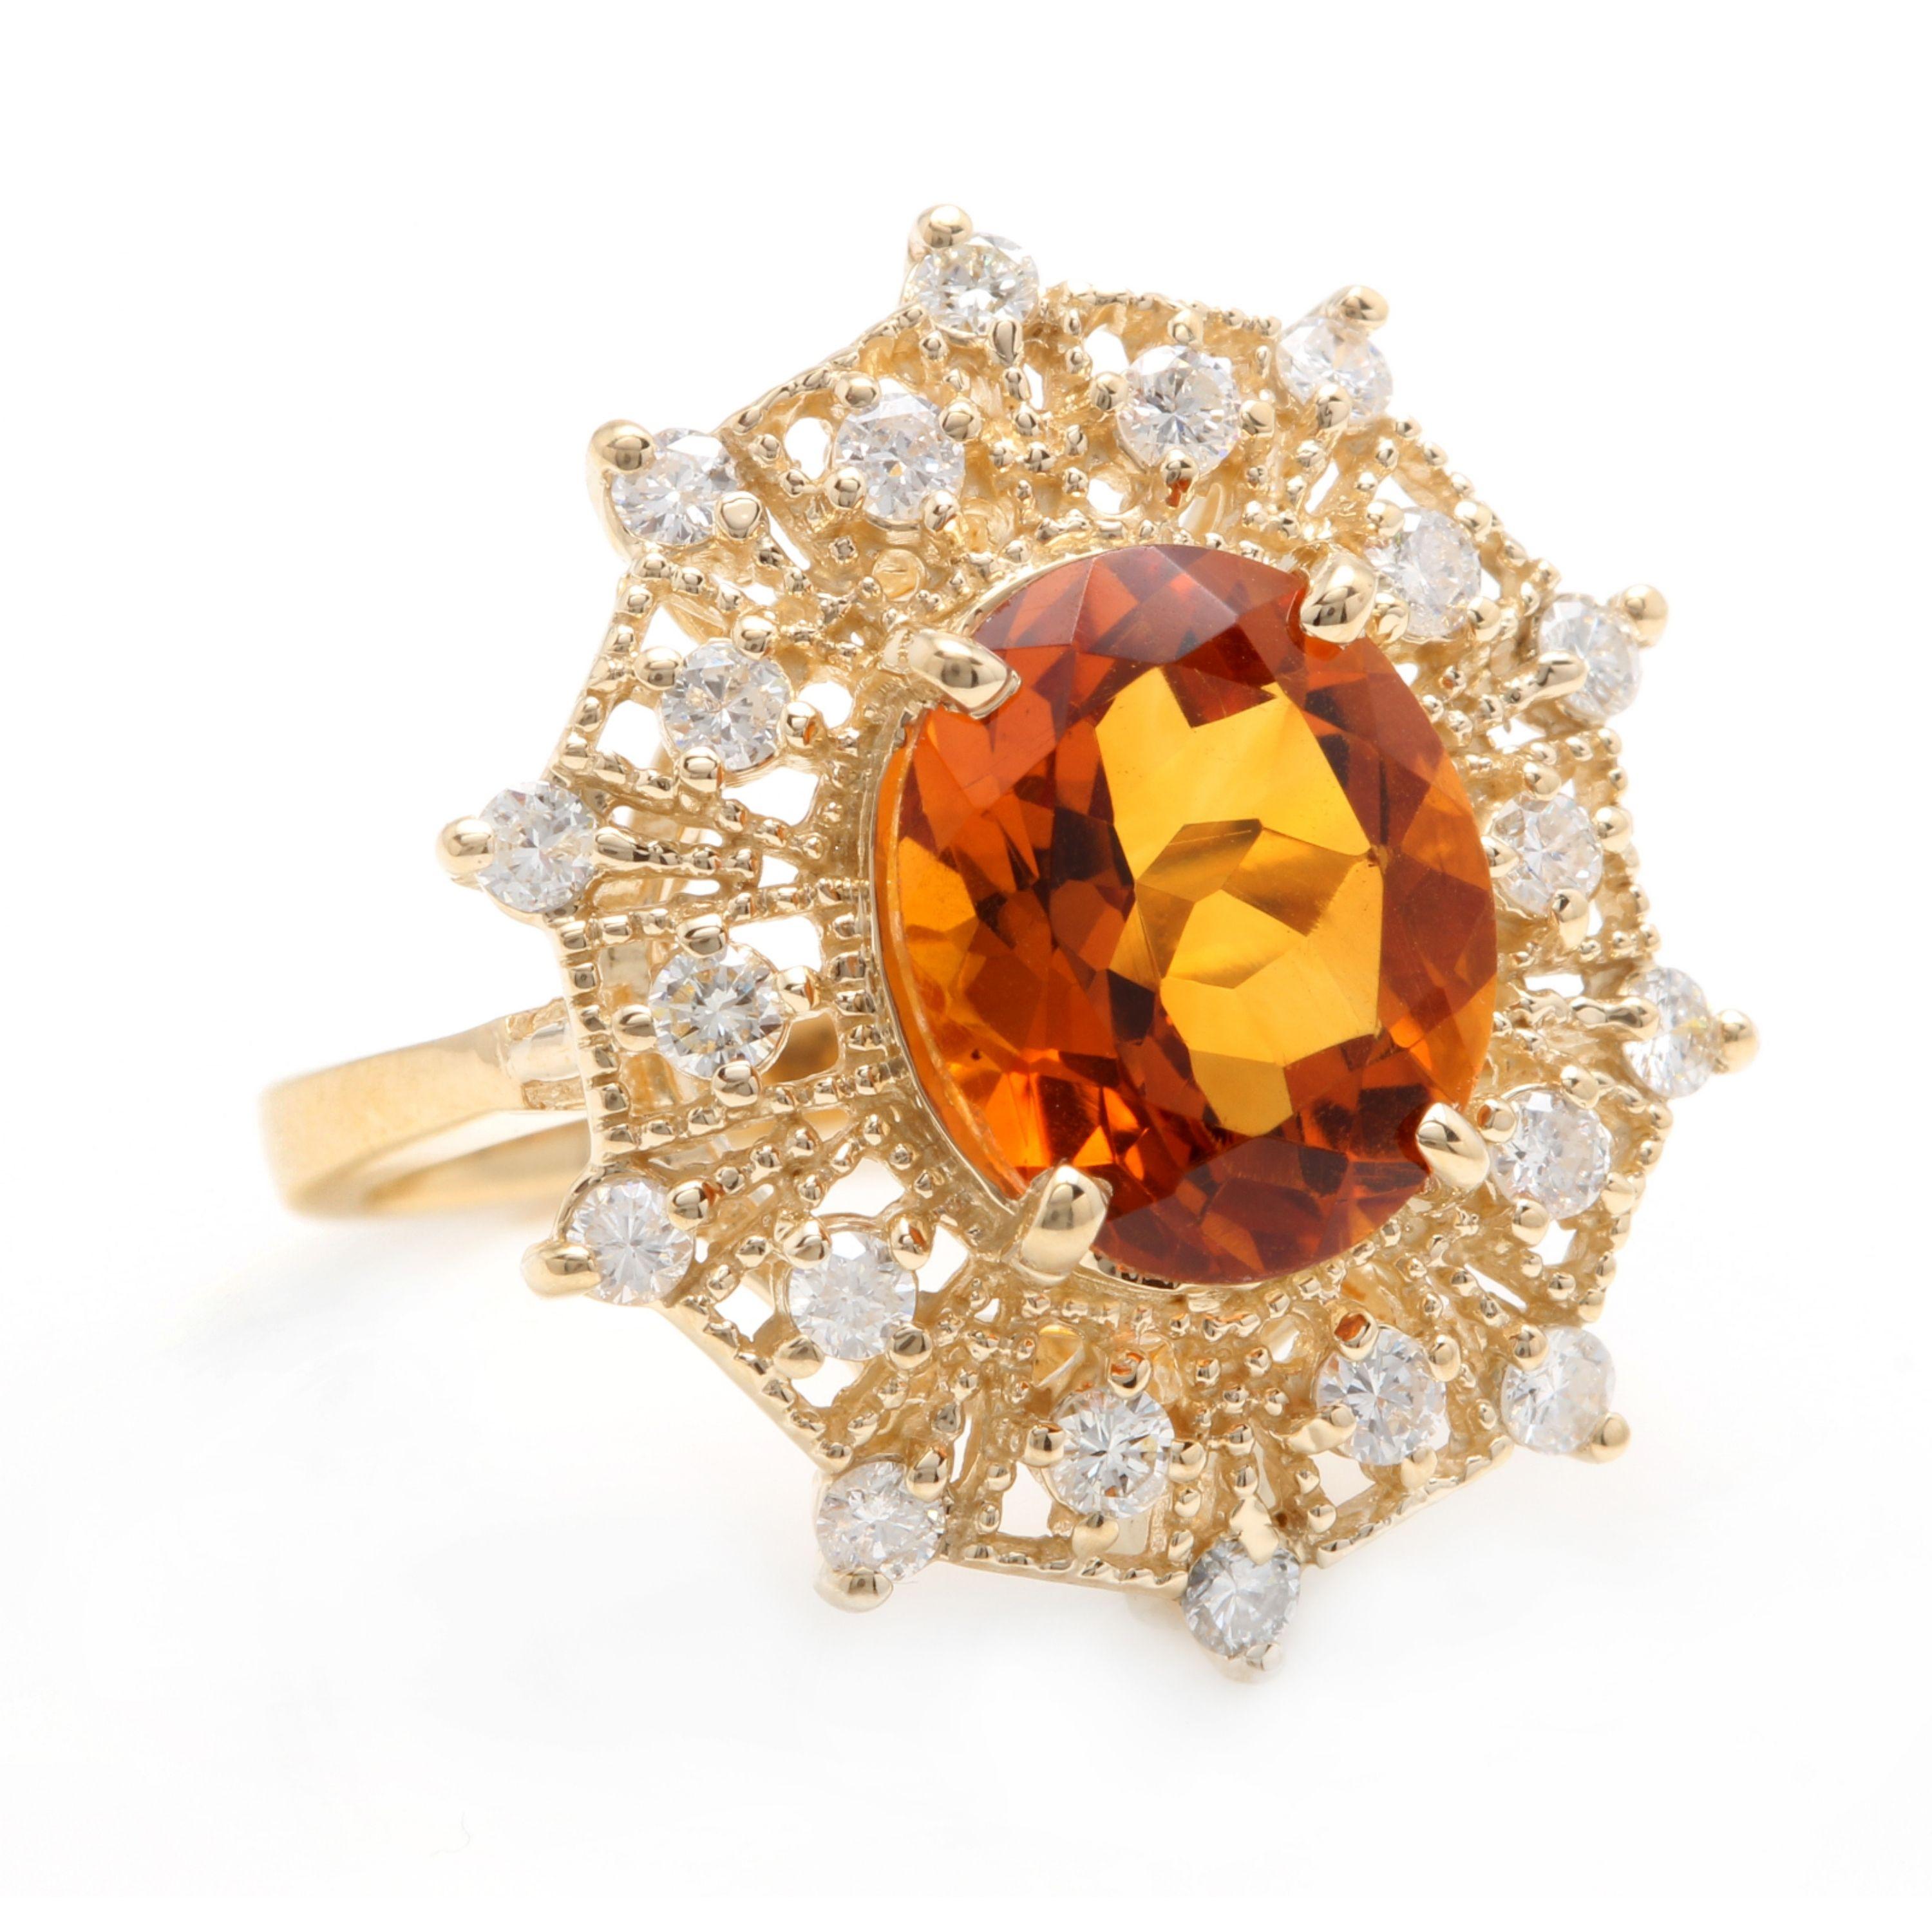 3.75 Carats Exquisite Natural Madeira Citrine and Diamond 14K Solid Yellow Gold Ring

Total Natural Citrine Weight is: 3.00 Carats

Citrine Measures: 10.00 x 8.00mm

Natural Round Diamonds Weight: .75 Carats (color G-H / Clarity Si1-SI2)

Ring size: